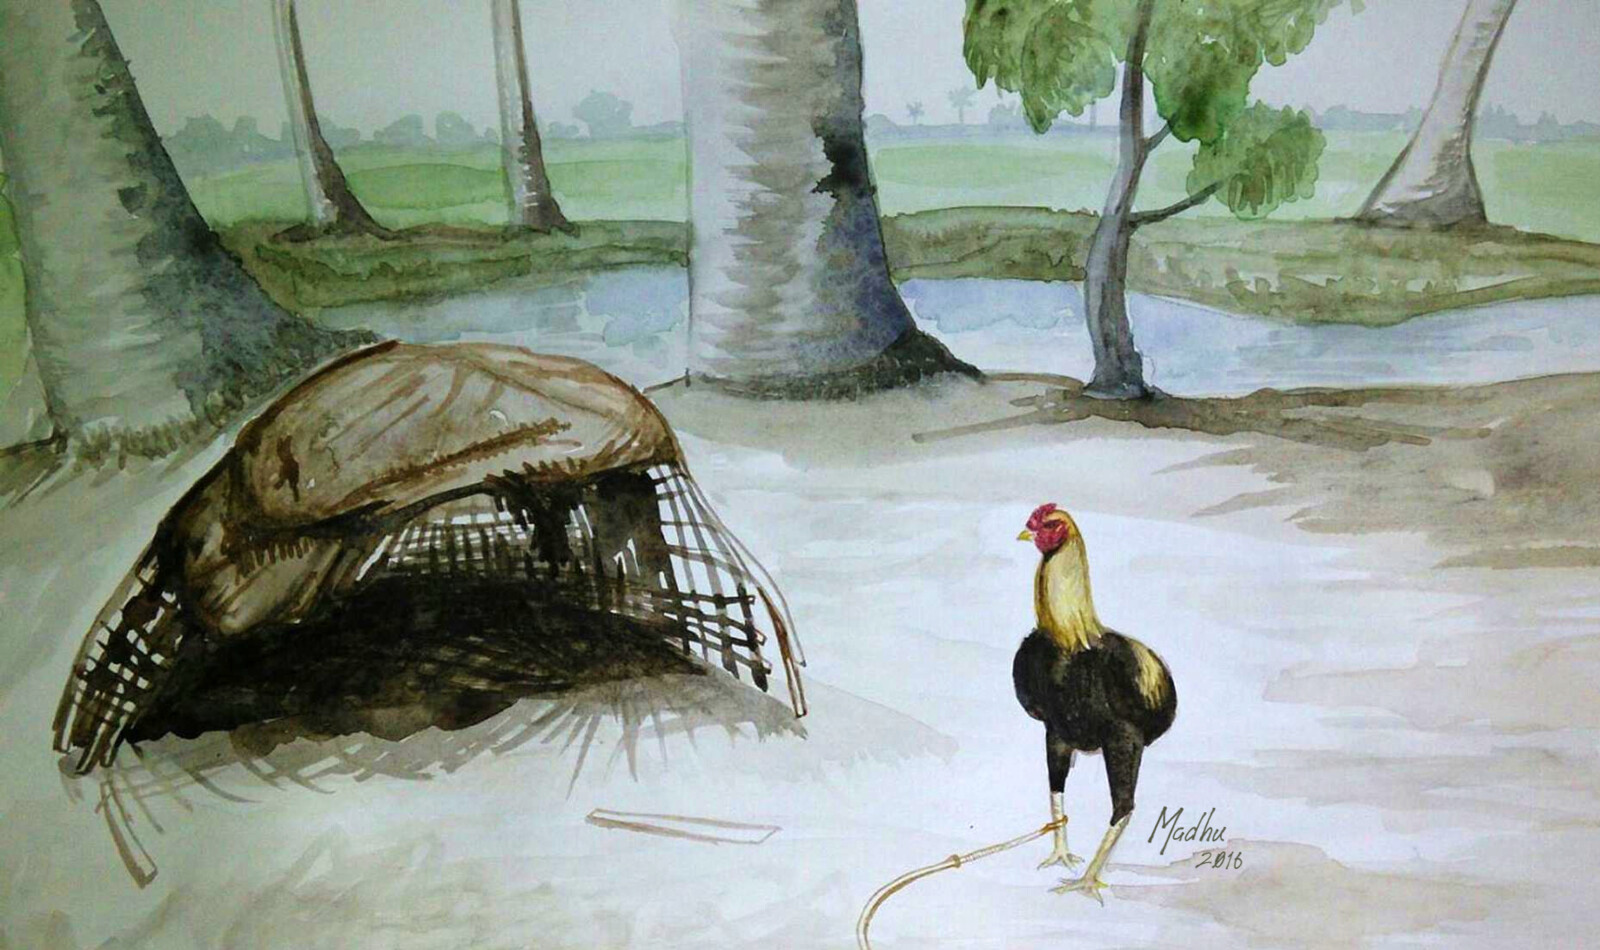 Cock - Water colors on paper